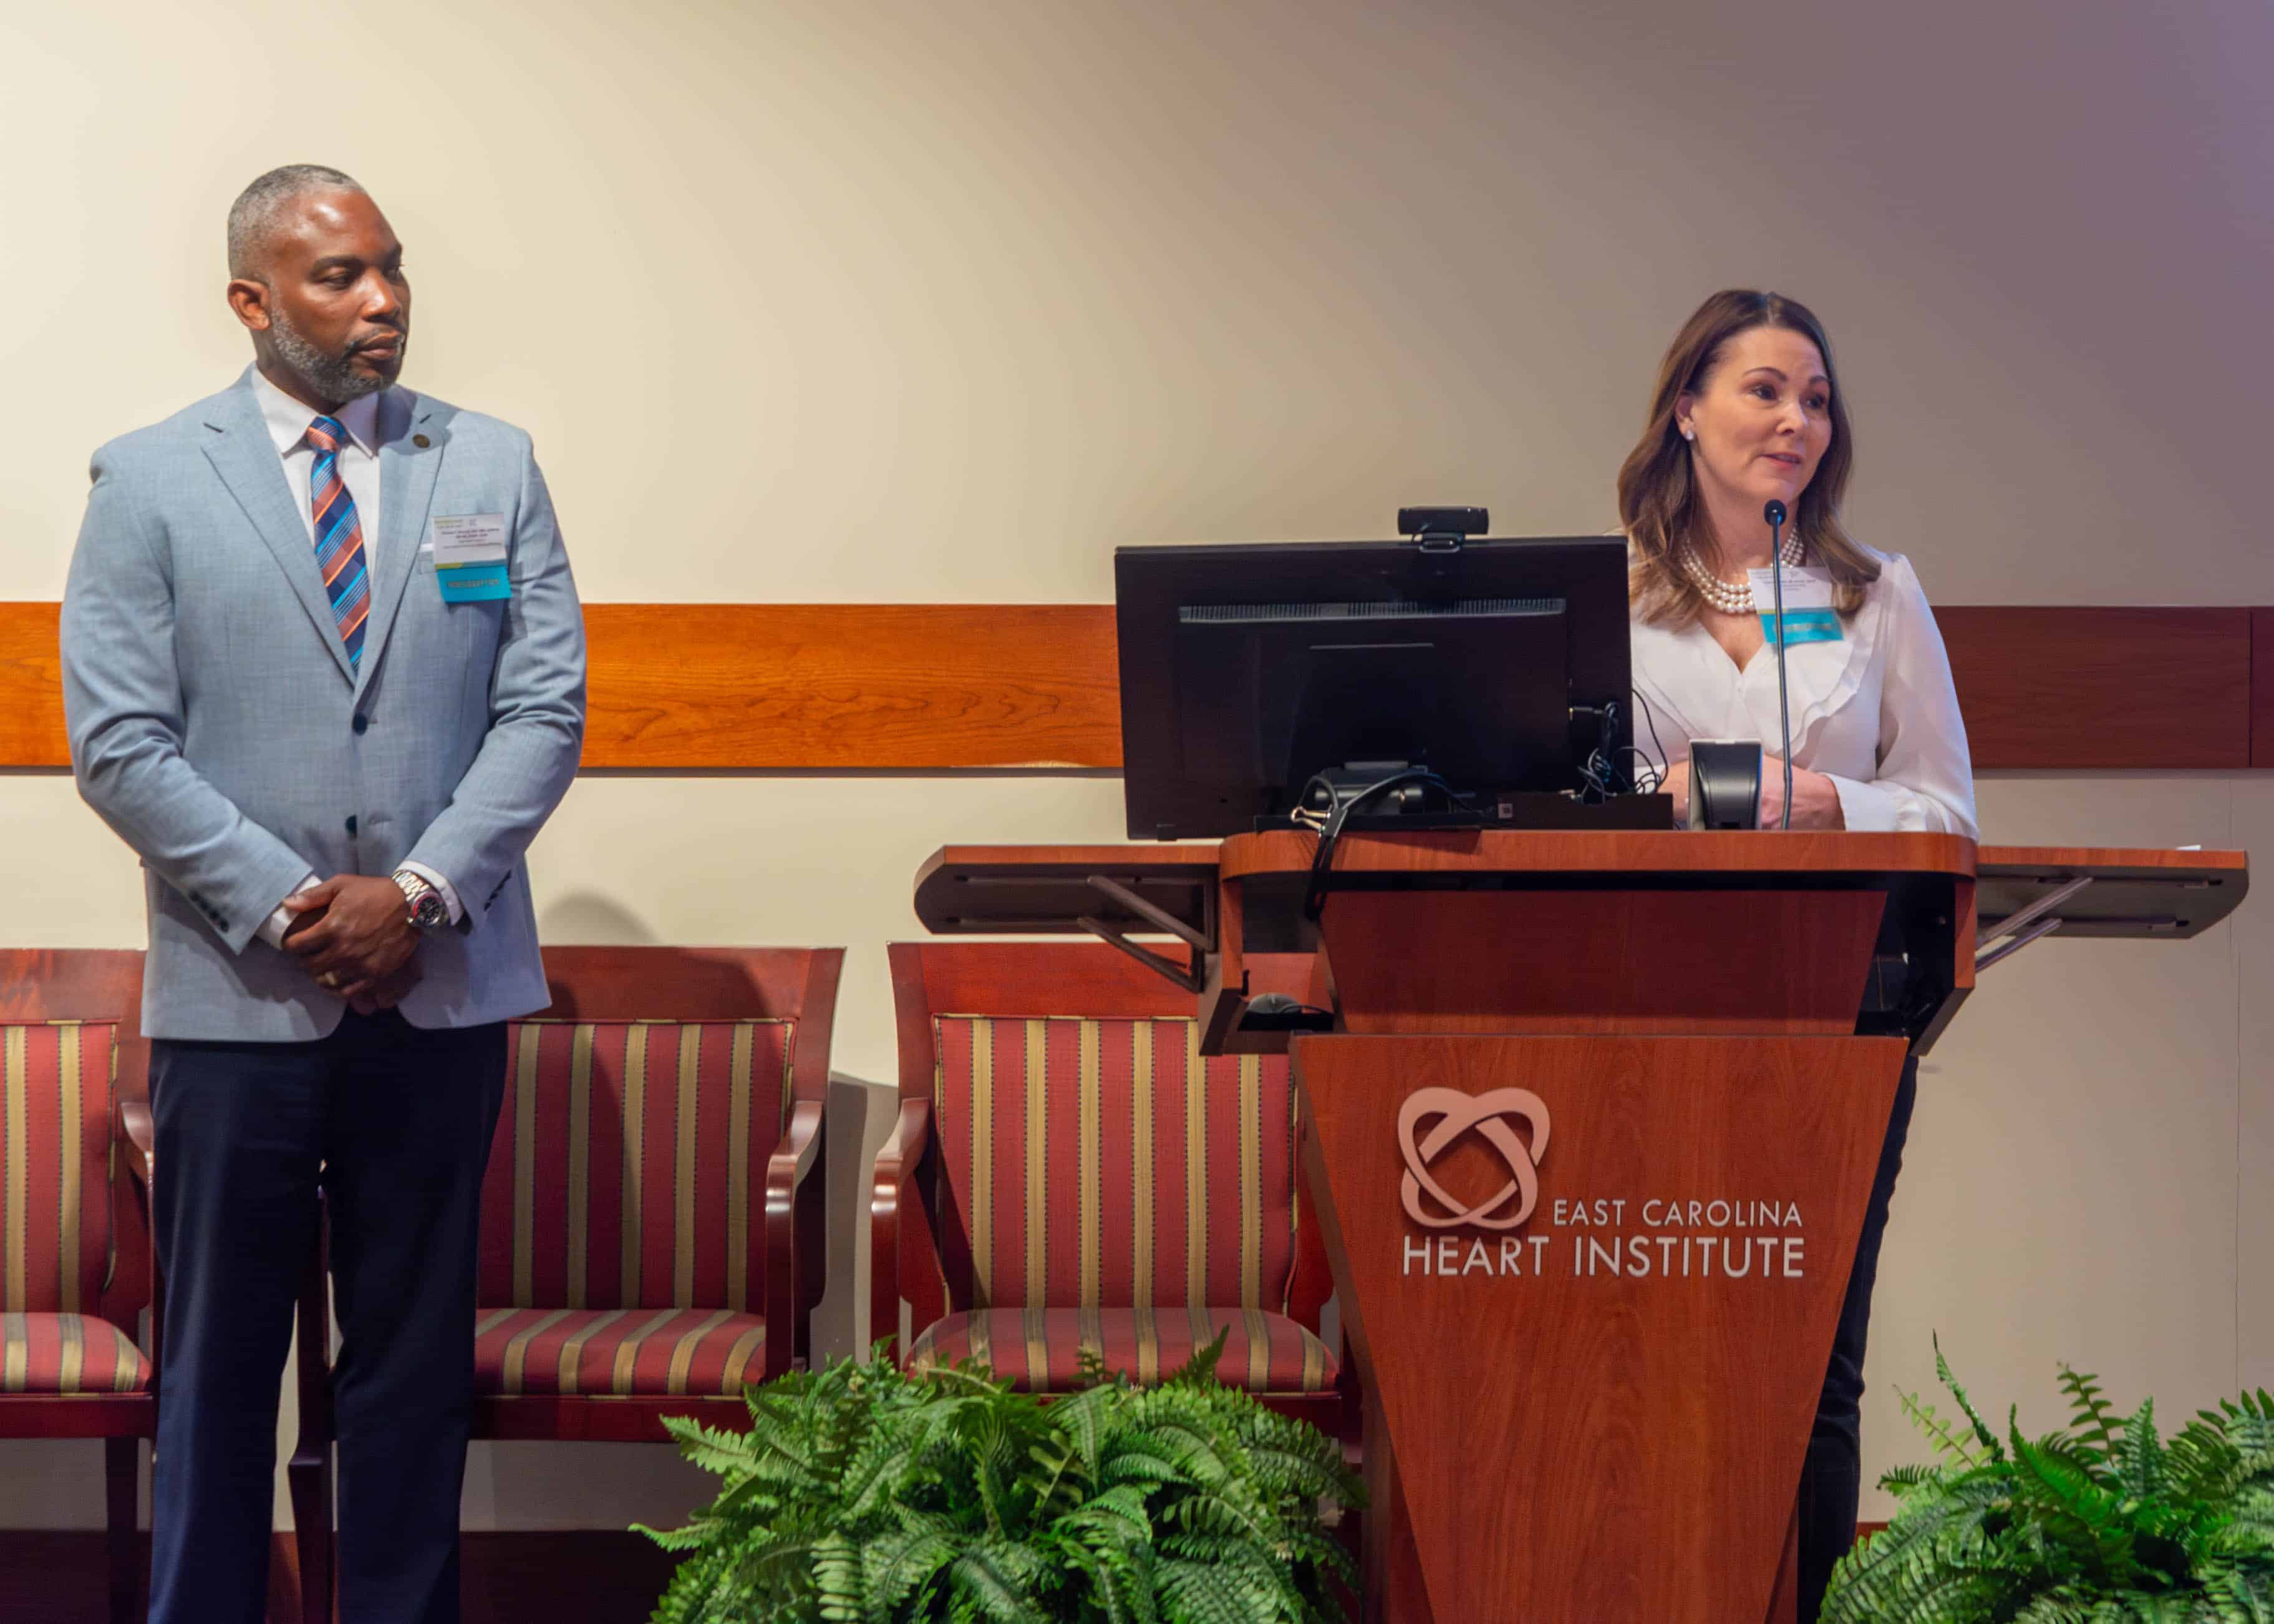 Dr. Trish Baise, chief nursing officer at ECU Health, speaks during the Collaborative Nurse Research Day. To her left is Dr. Bimbola Akintade, dean and professor at ECU’s College of Nursing.